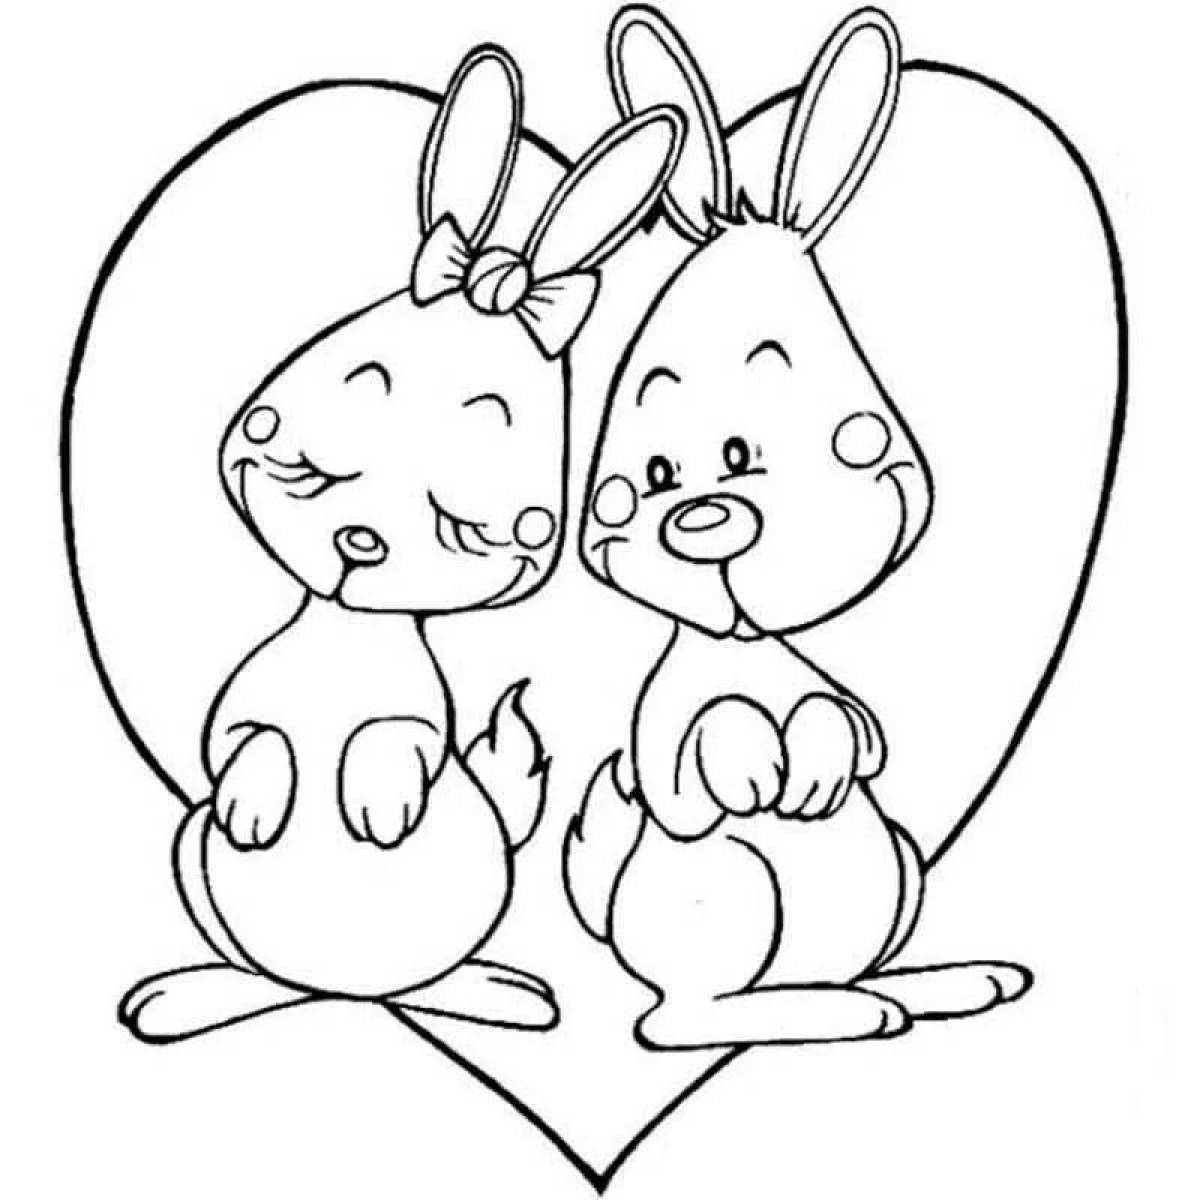 Cute bunny coloring book with heart